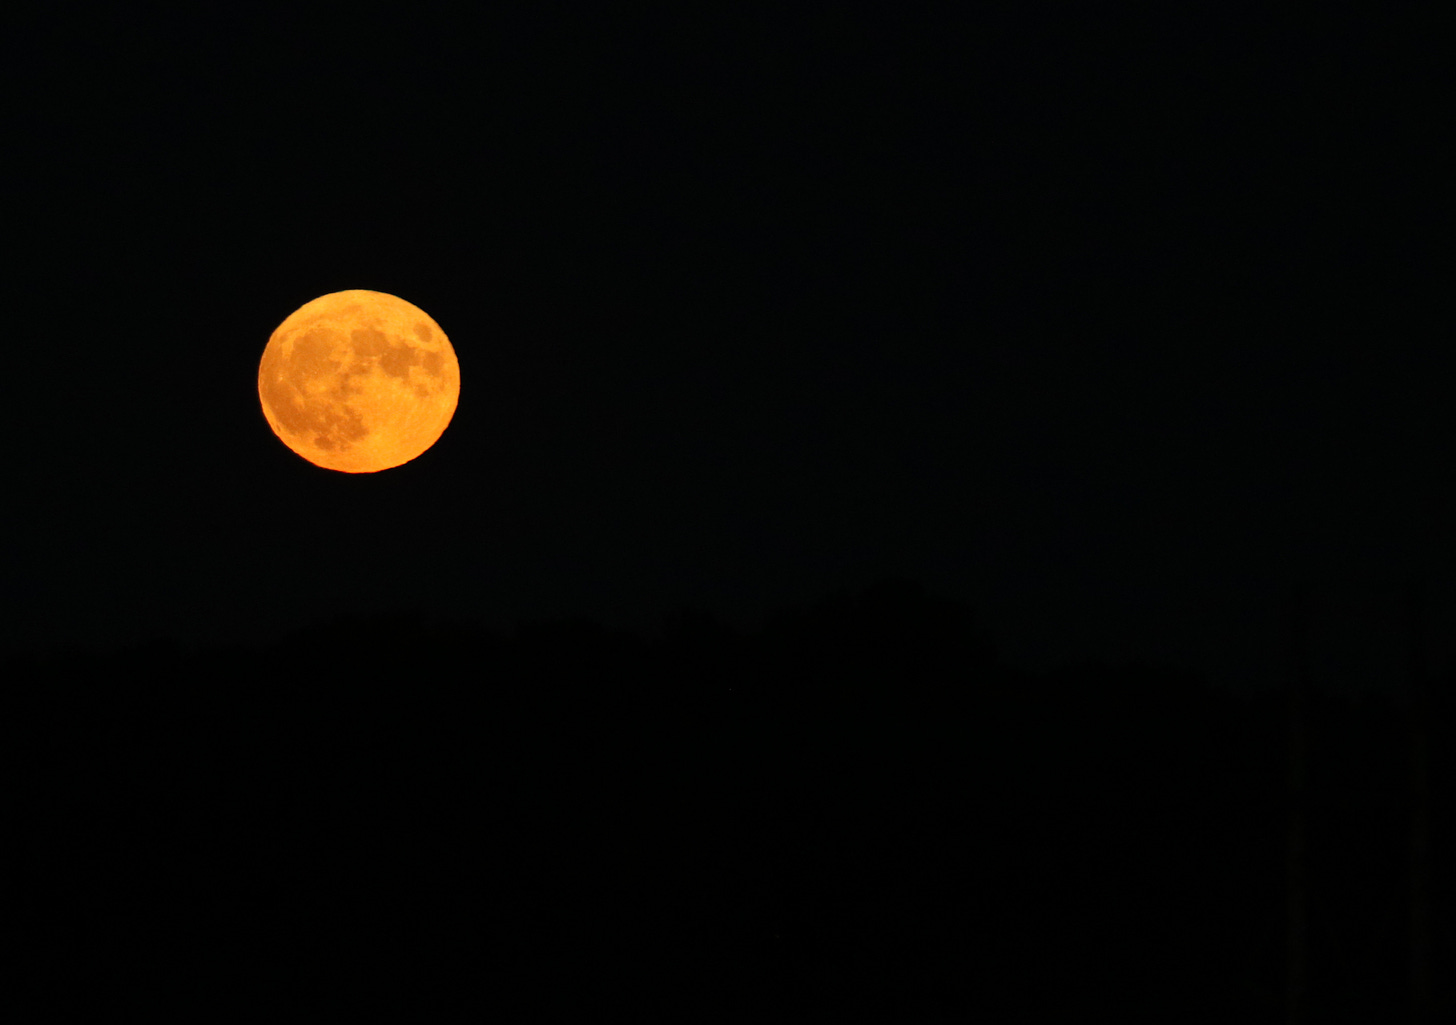 The full moon, tinted orange-gold, hovers in the middle of an otherwise all-black field.